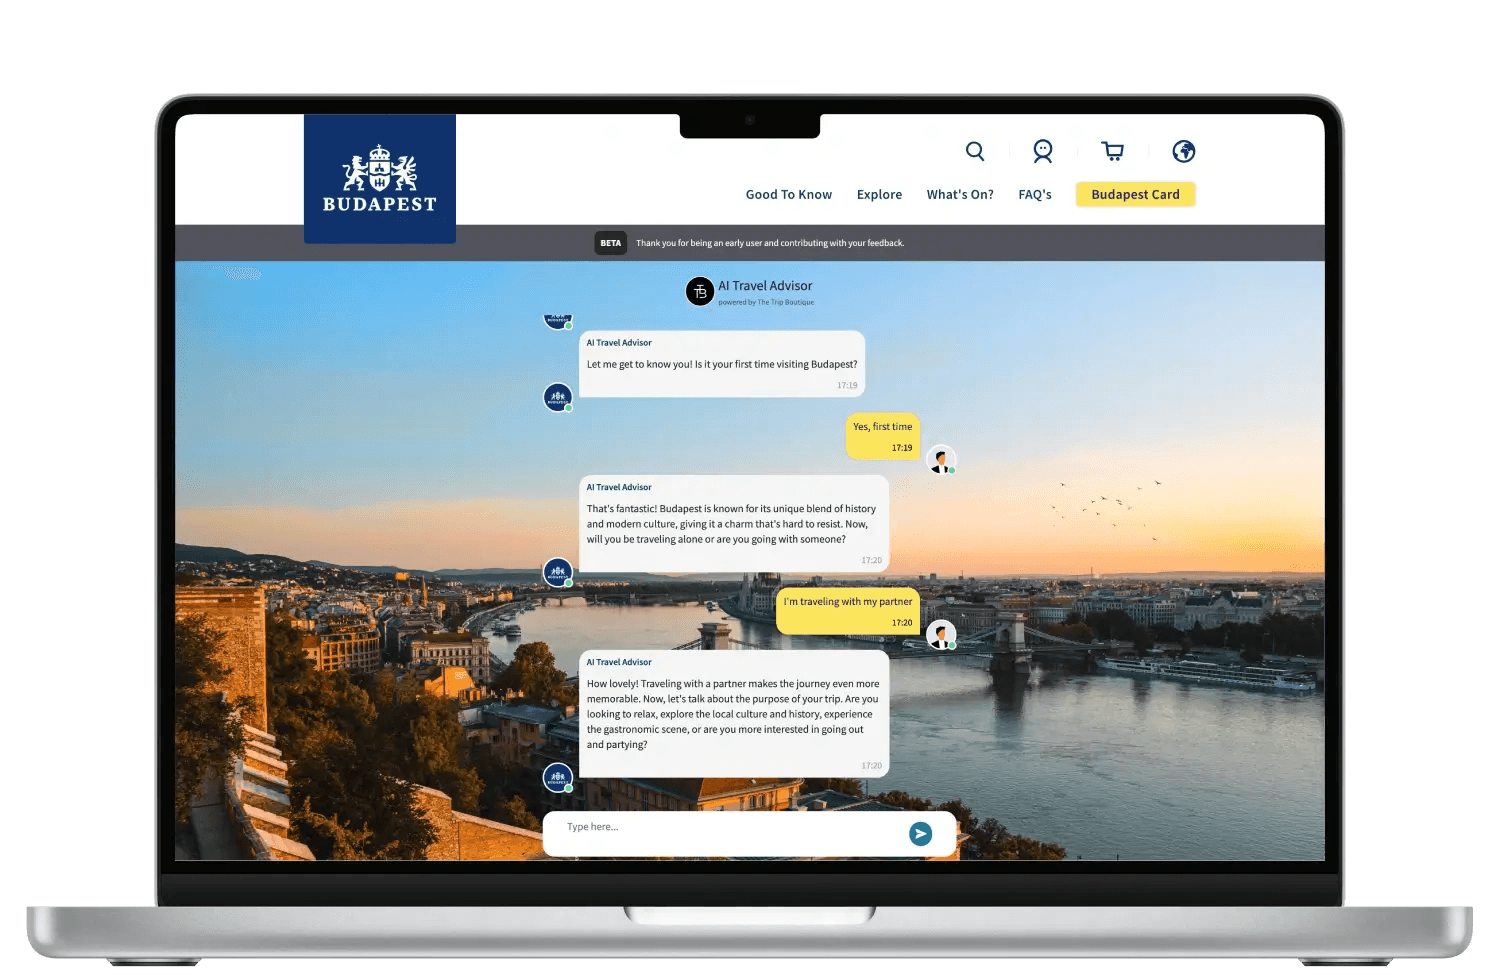 Visitors set up their interest profiles via Quiz or AI-powered Chat